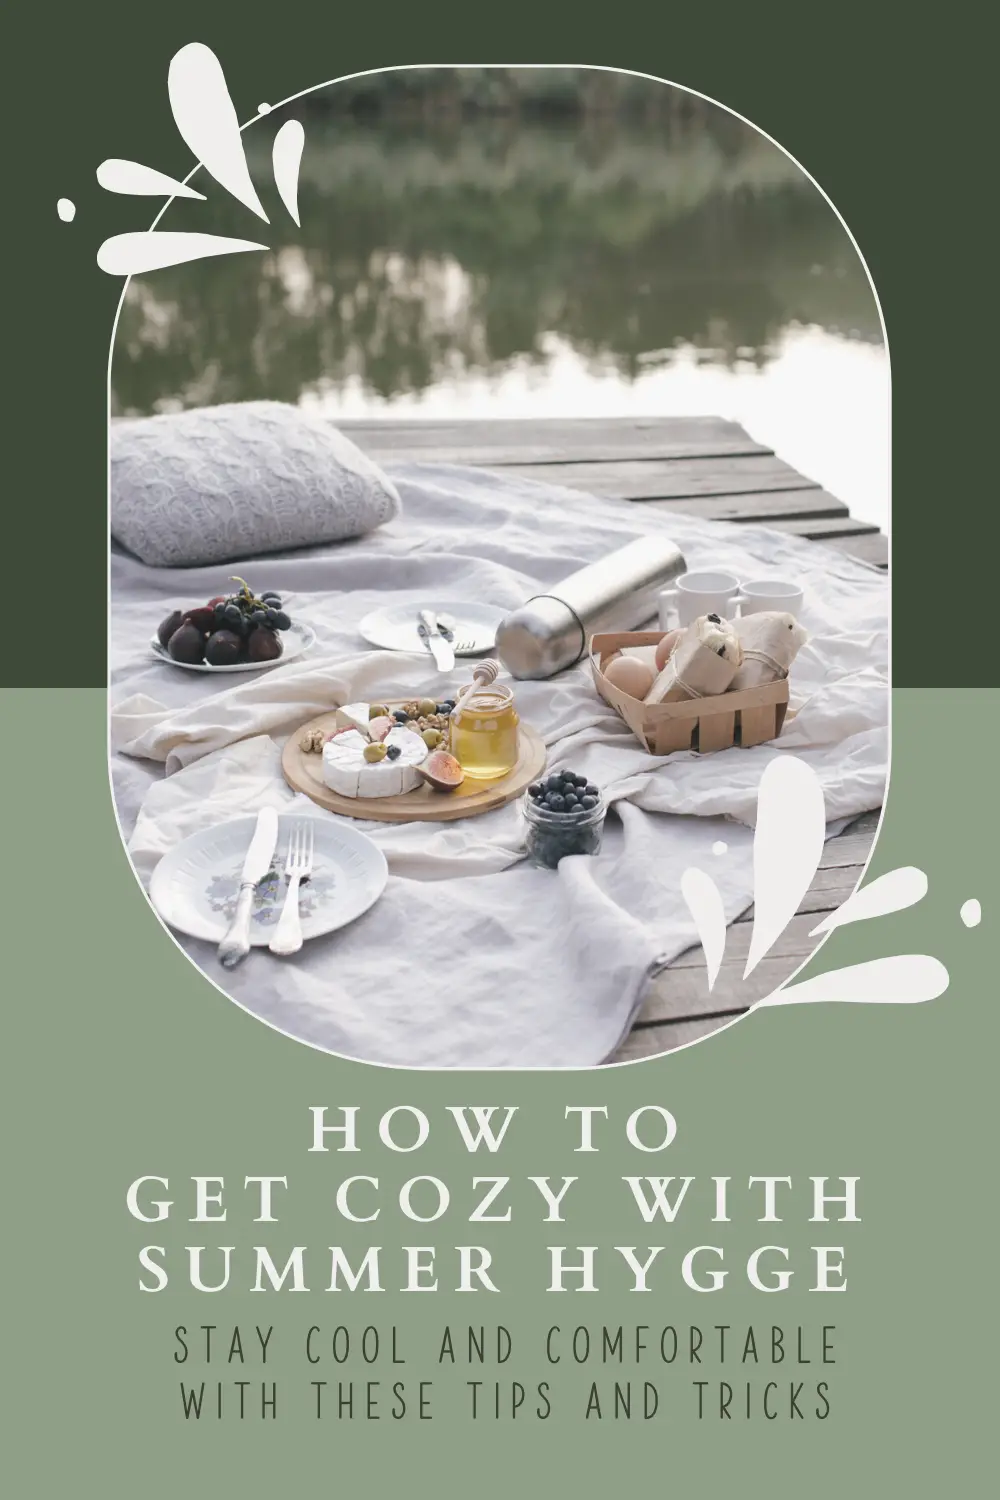 How to get cozy with summer hygge: stay cool and comfortable with these tips and tricks